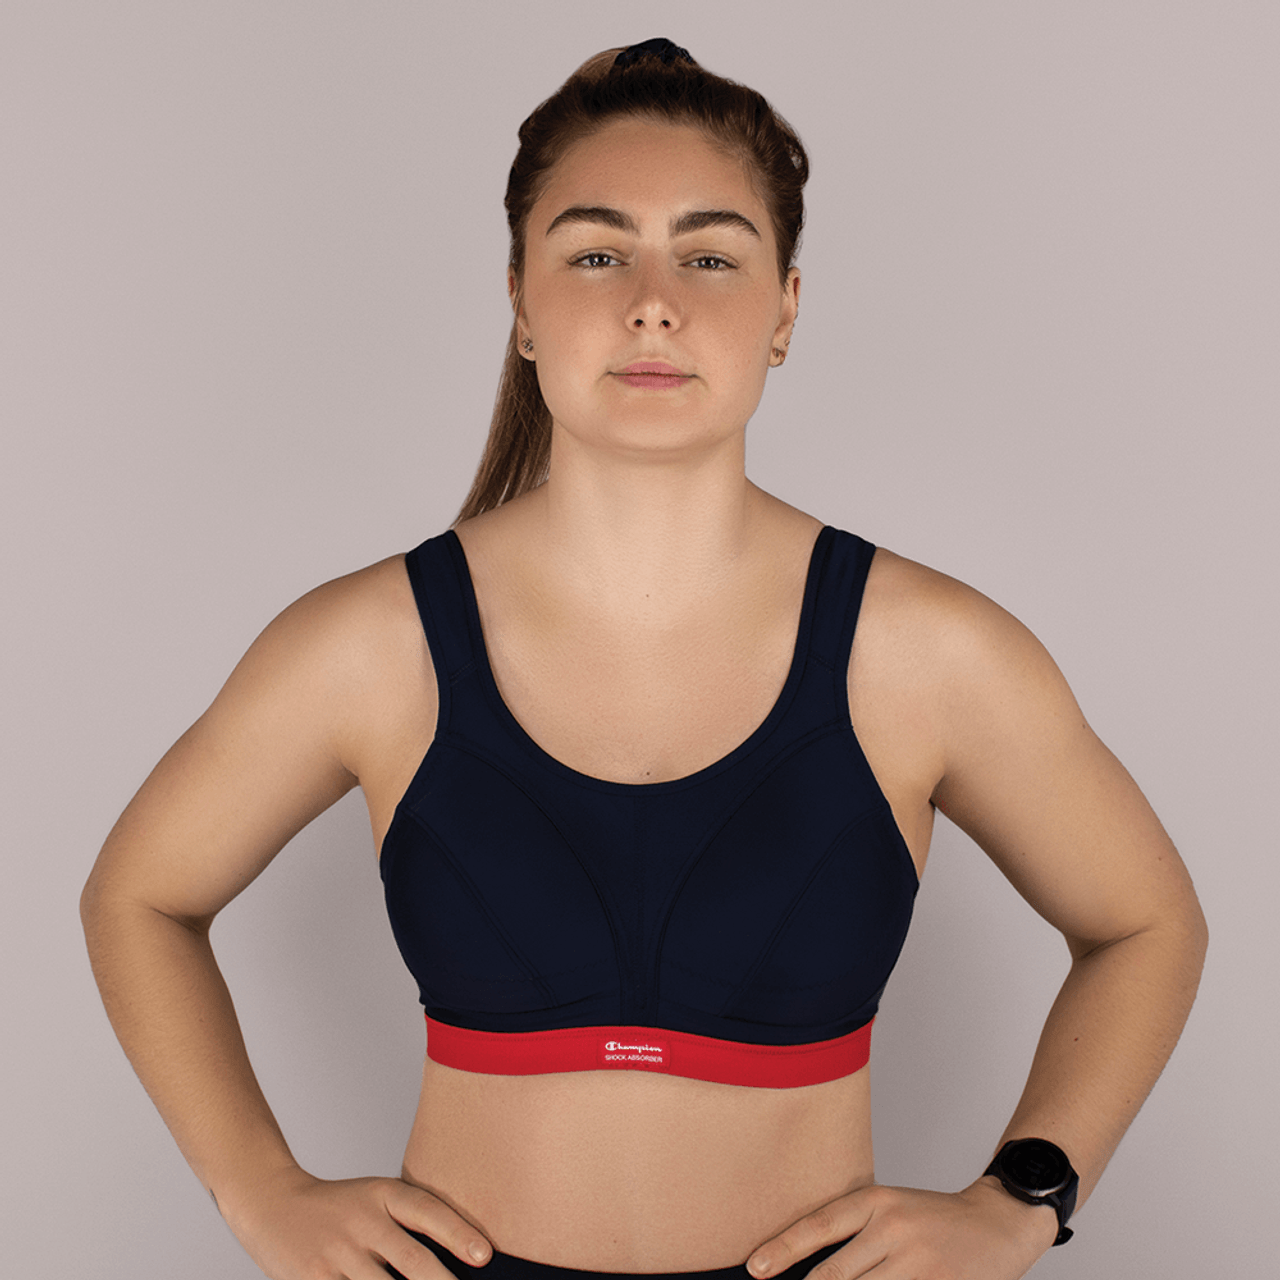 Shock Absorber D+ Classic high support sports bra in navy and red-Multi